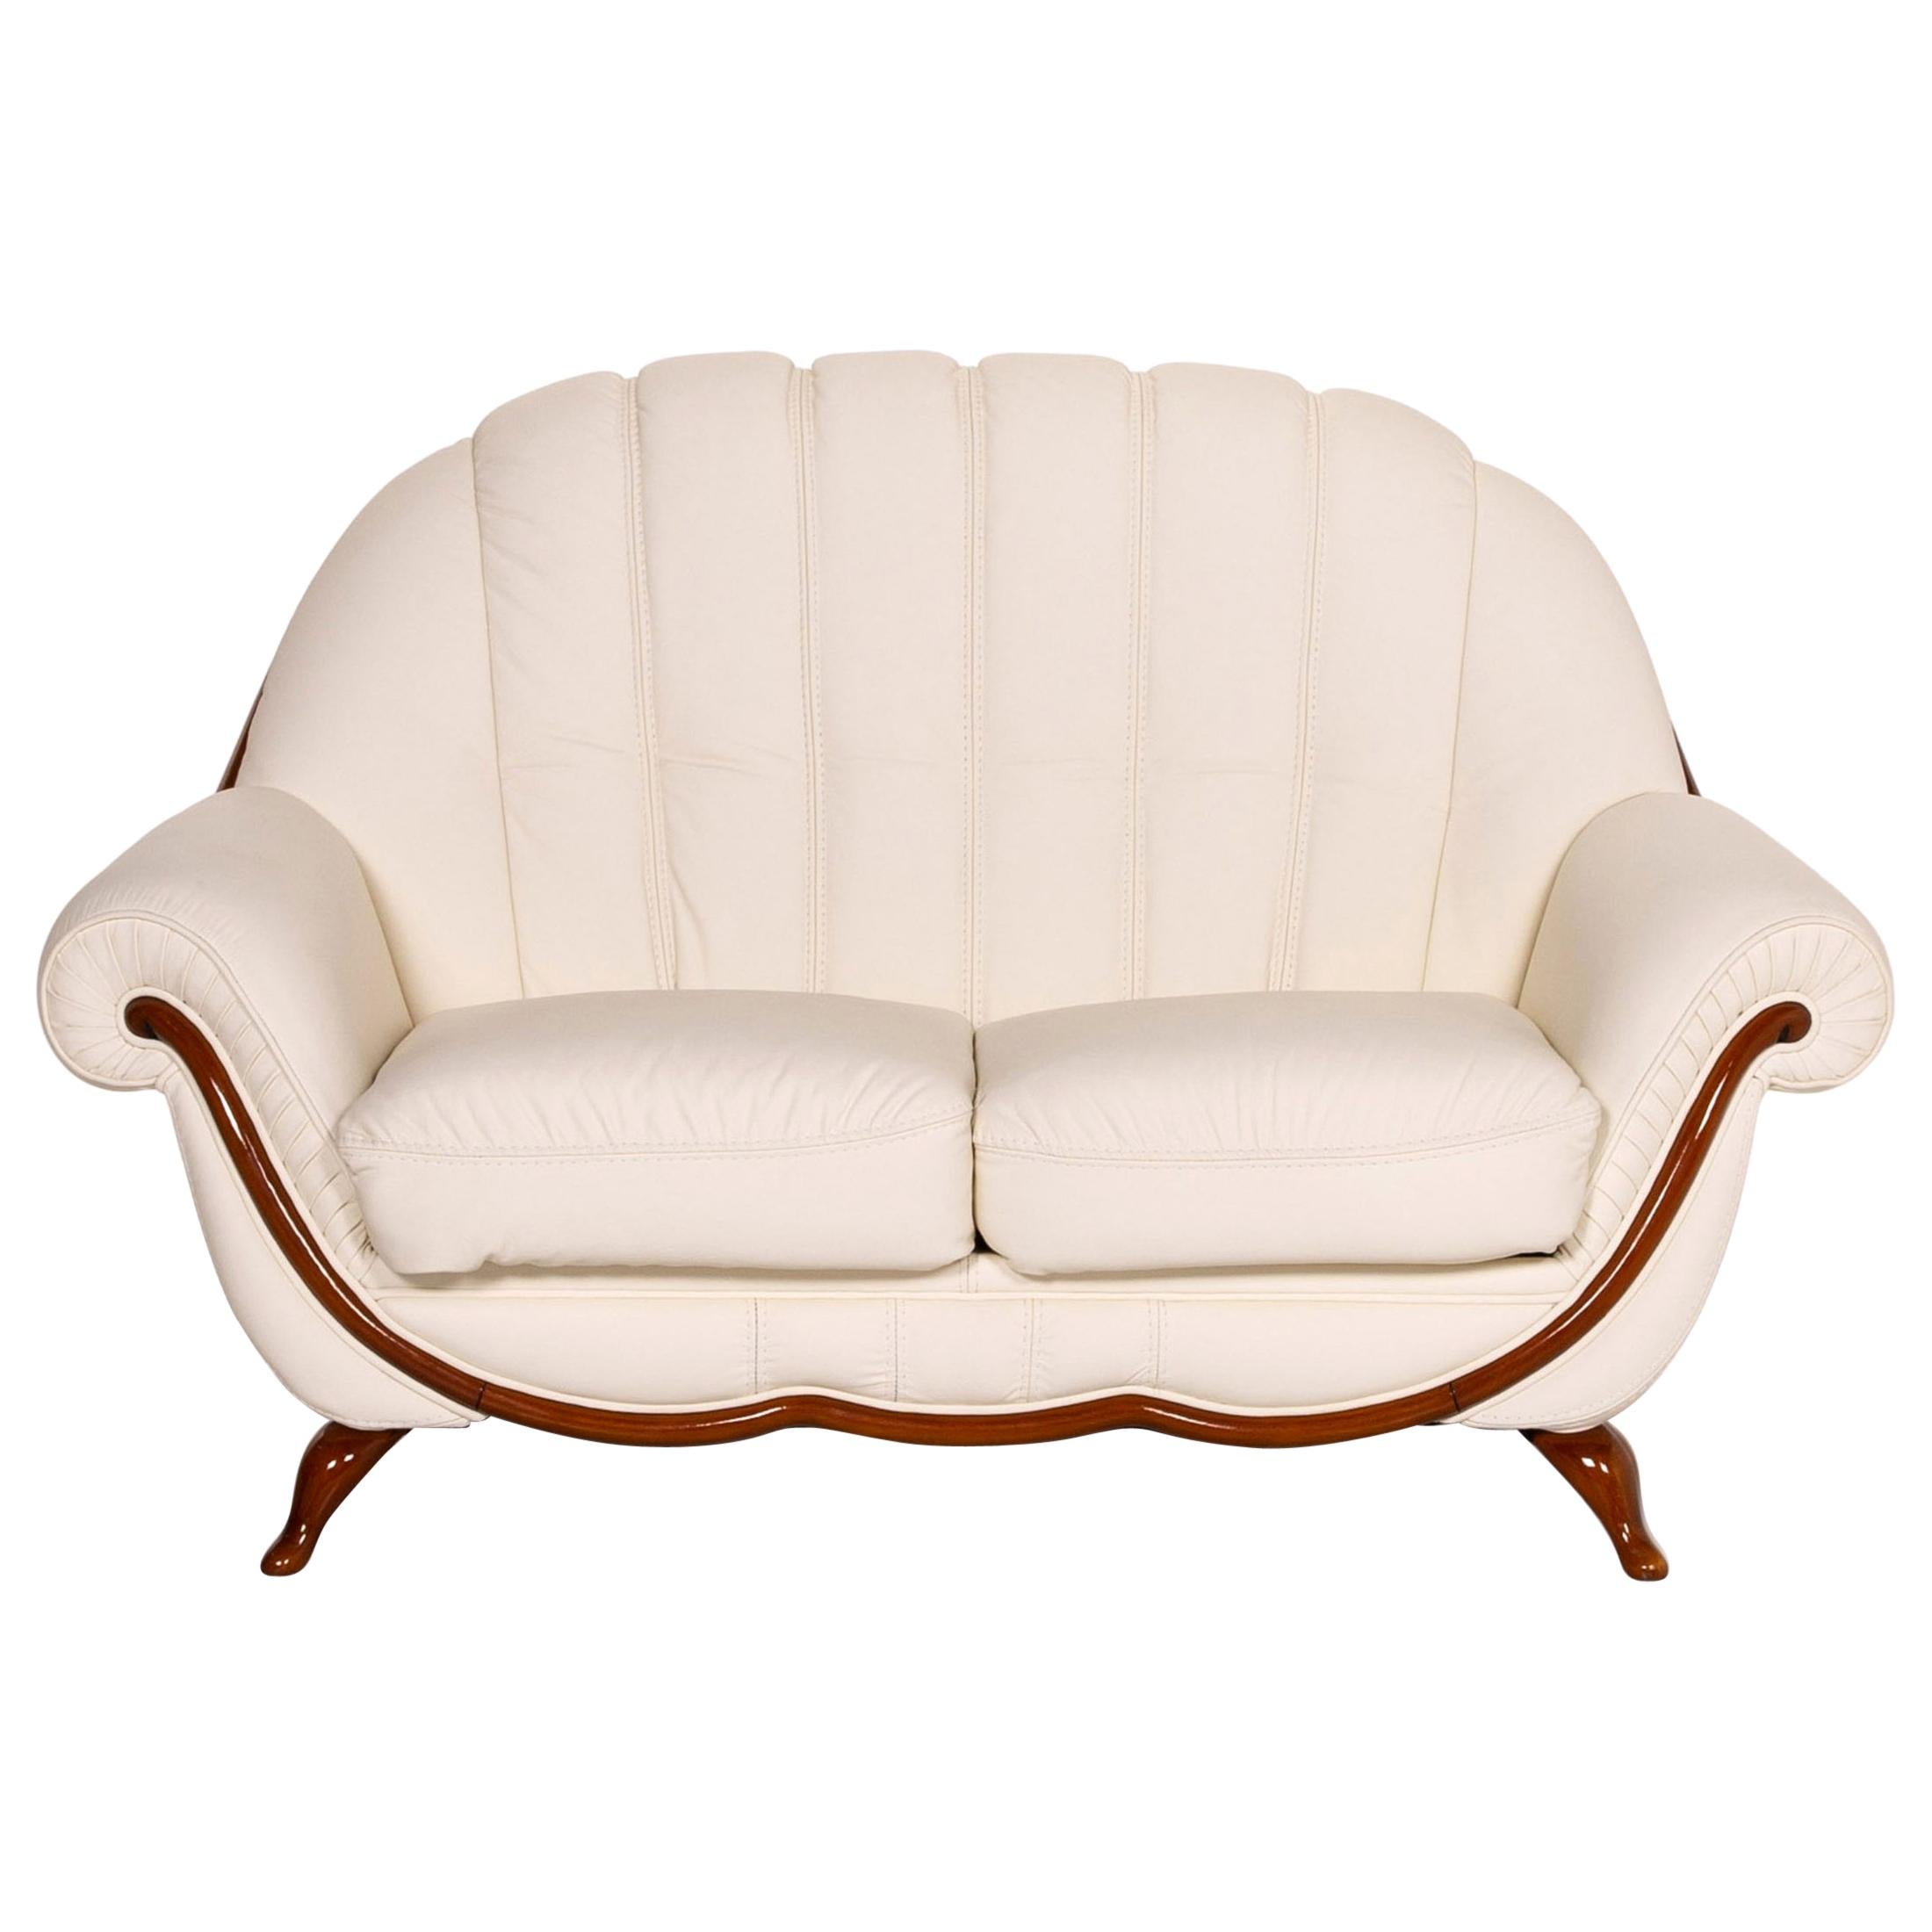 Nieri Leather Sofa Cream Two-Seat Couch For Sale